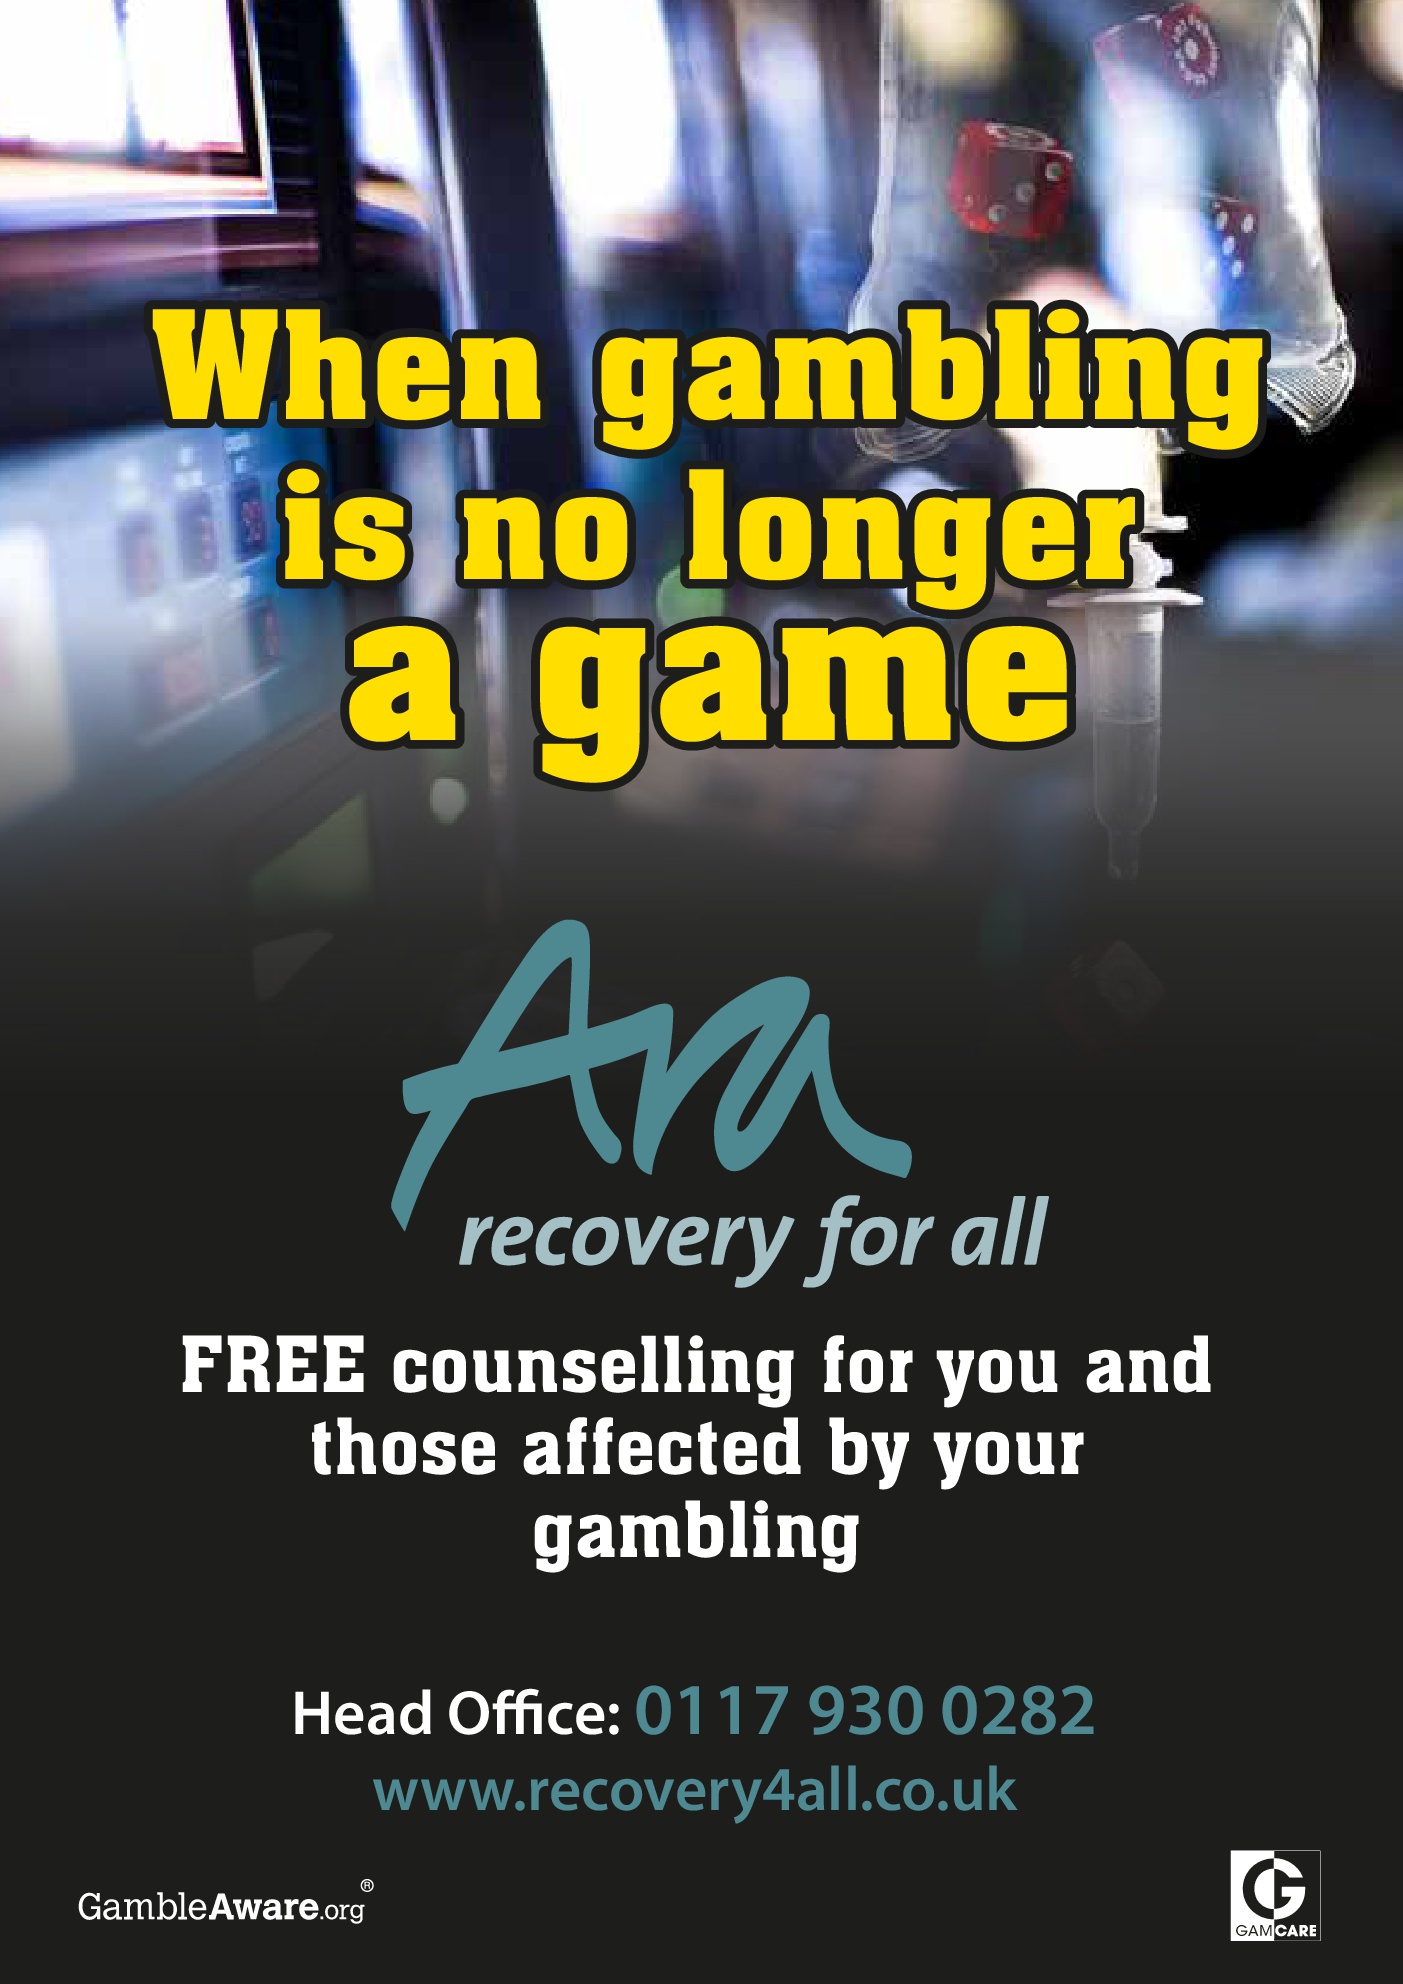 Gambling support available